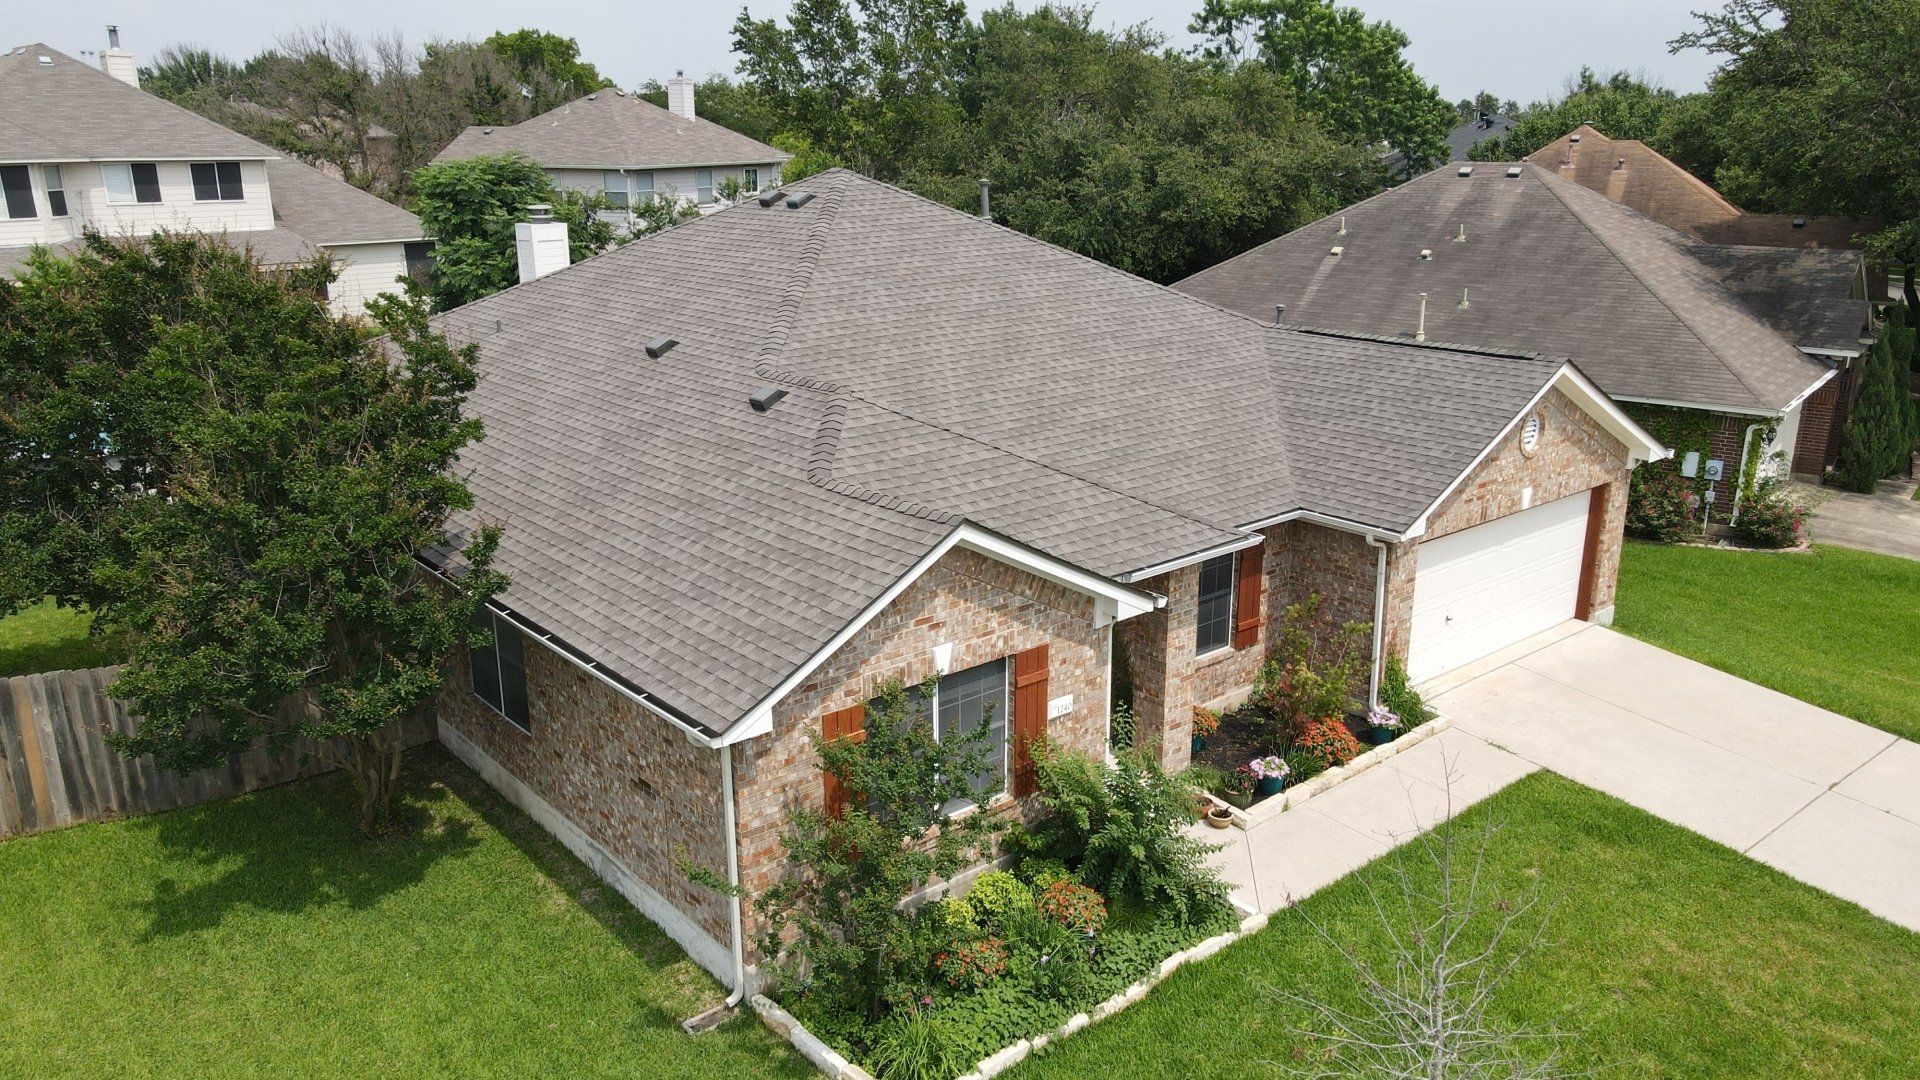 Aerial view of a brand new shingle roof in a suburban neighborhood